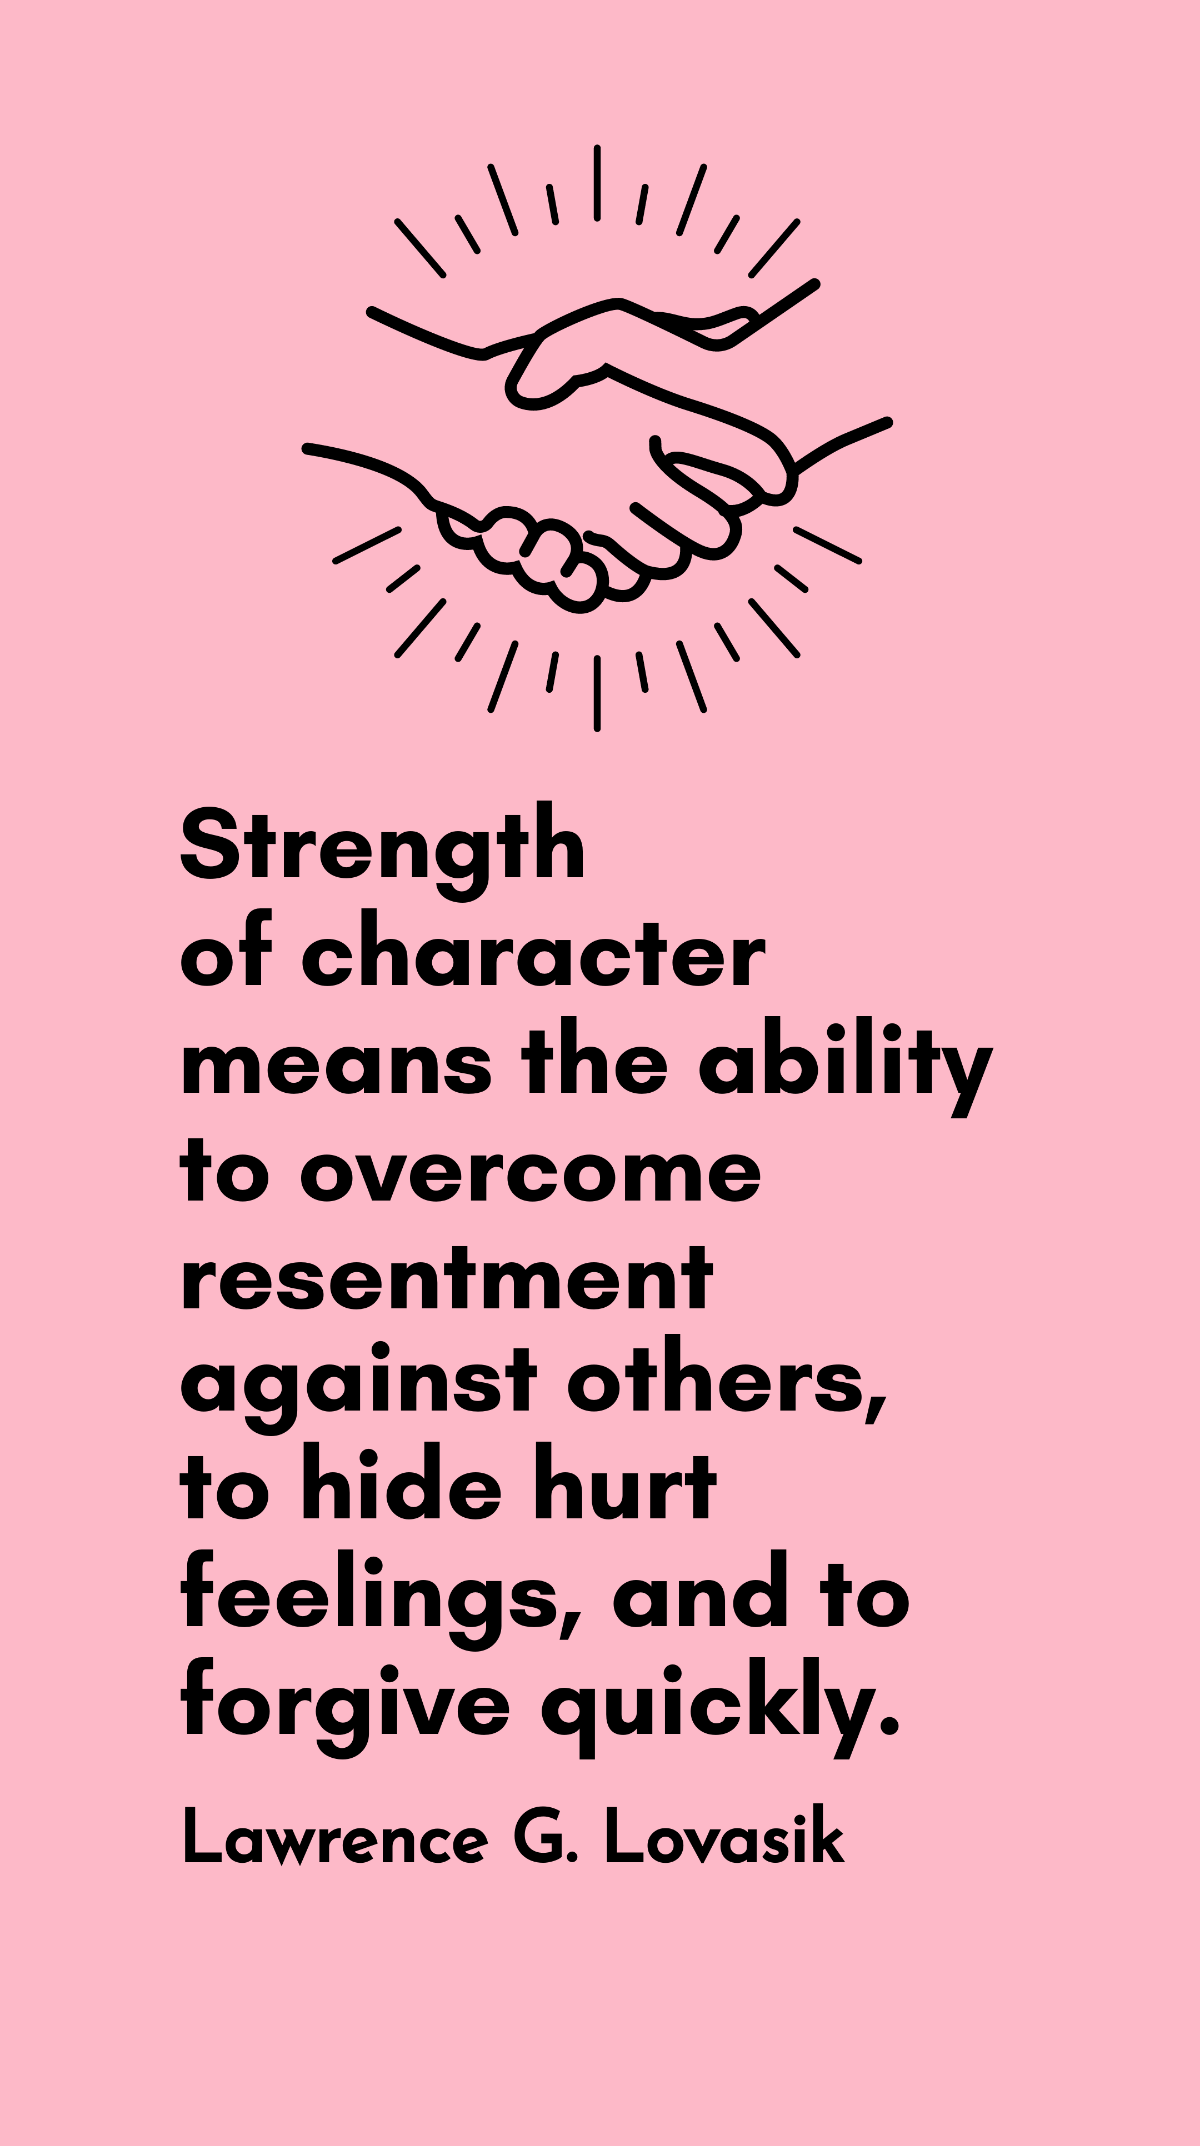 Lawrence G. Lovasik - Strength of character means the ability to overcome resentment against others, to hide hurt feelings, and to forgive quickly. Template